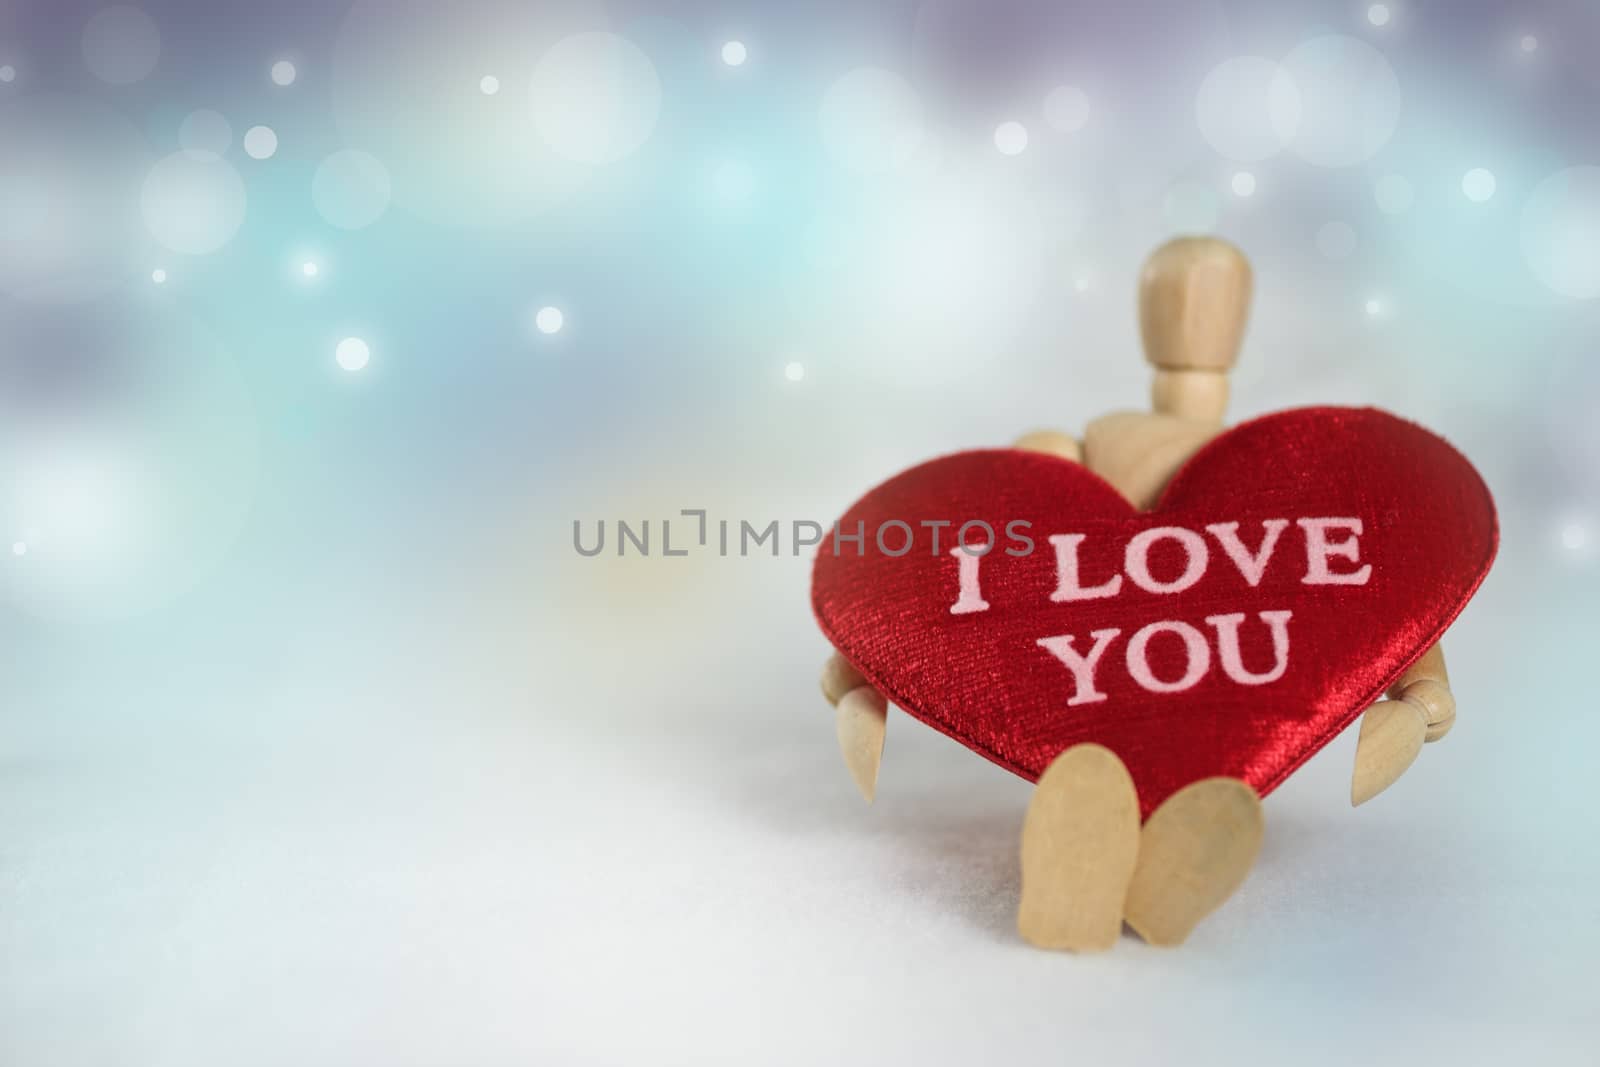 Wooden dummy and heart shape on abstract bokeh background in love concept for valentines day with romantic moment.